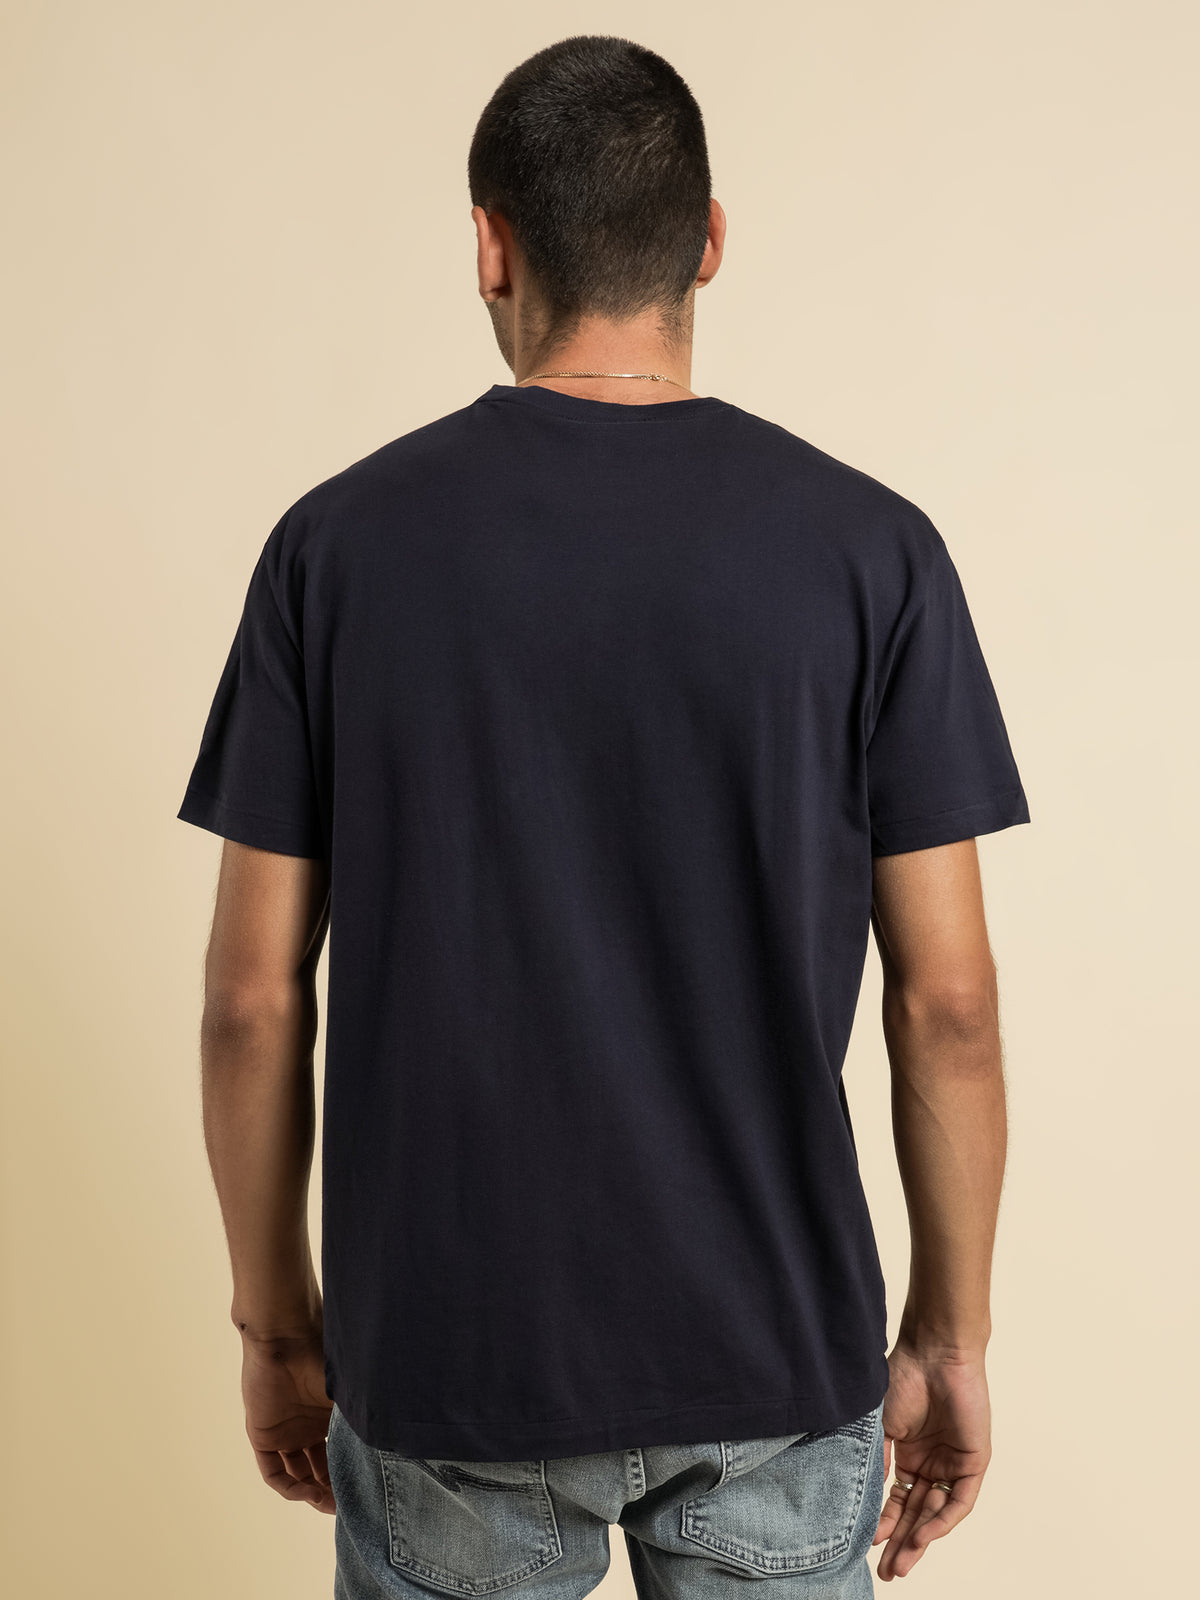 Classic Fit T-Shirt in Ink Blue